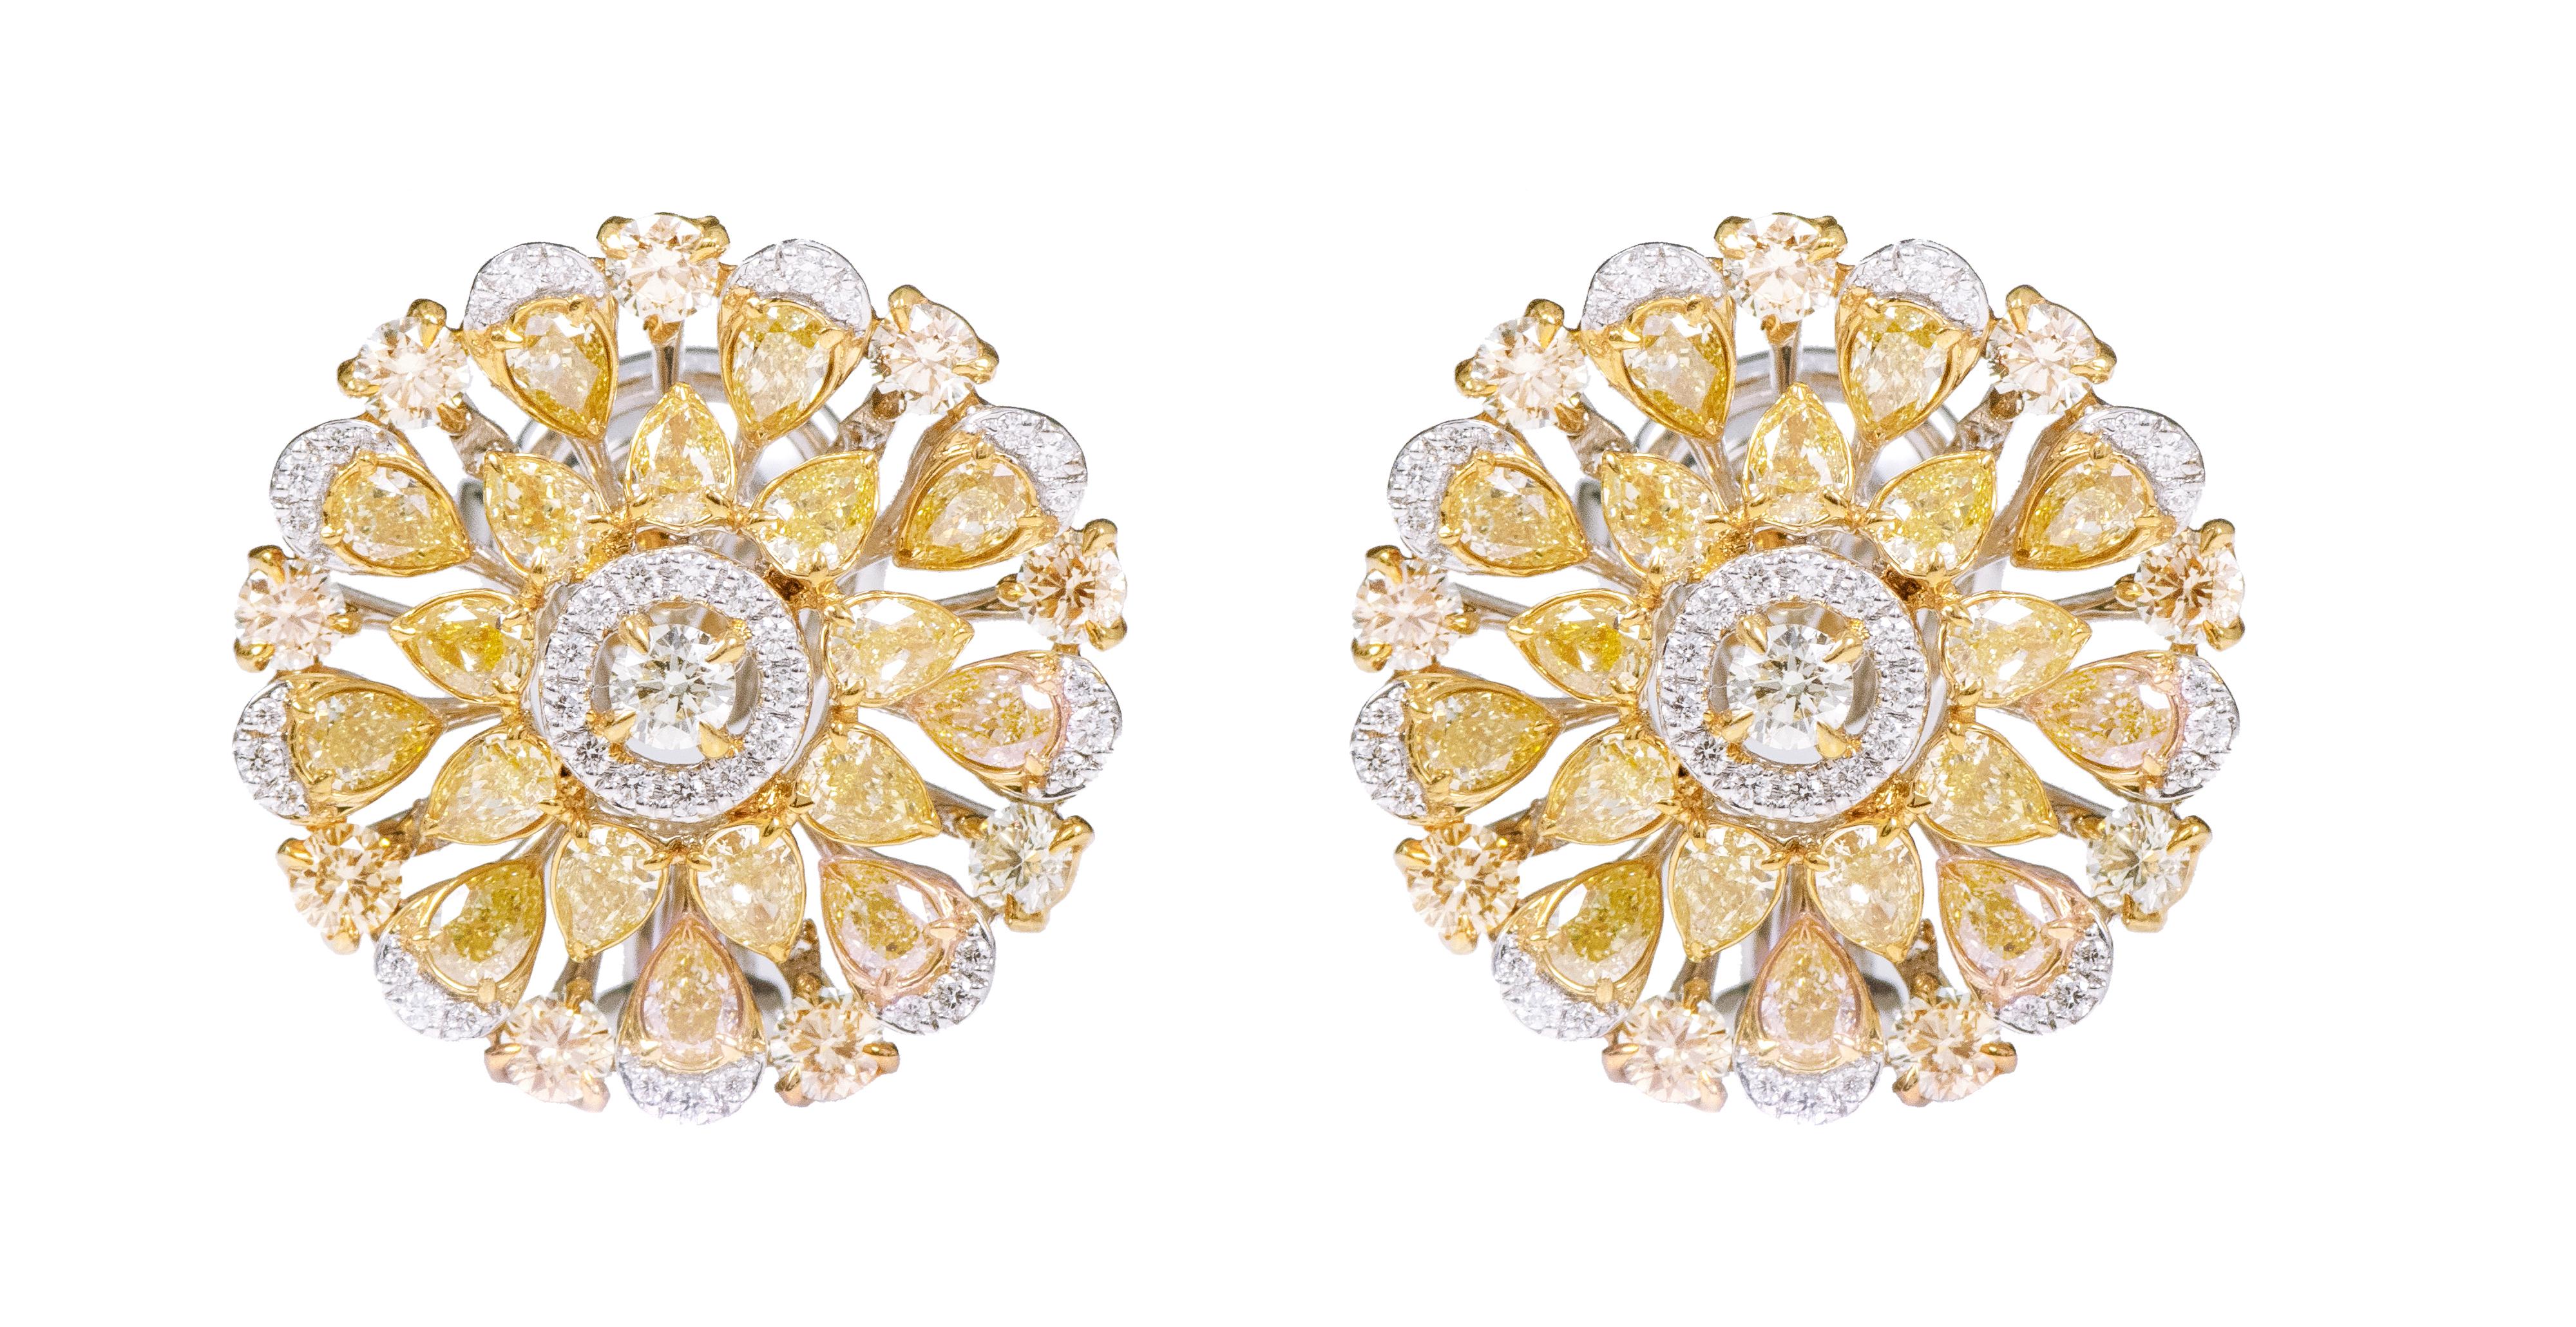 18 Karat Gold 5.69 Carat Fancy Yellow and White Diamond Solitaire Stud Earrings For Sale 1